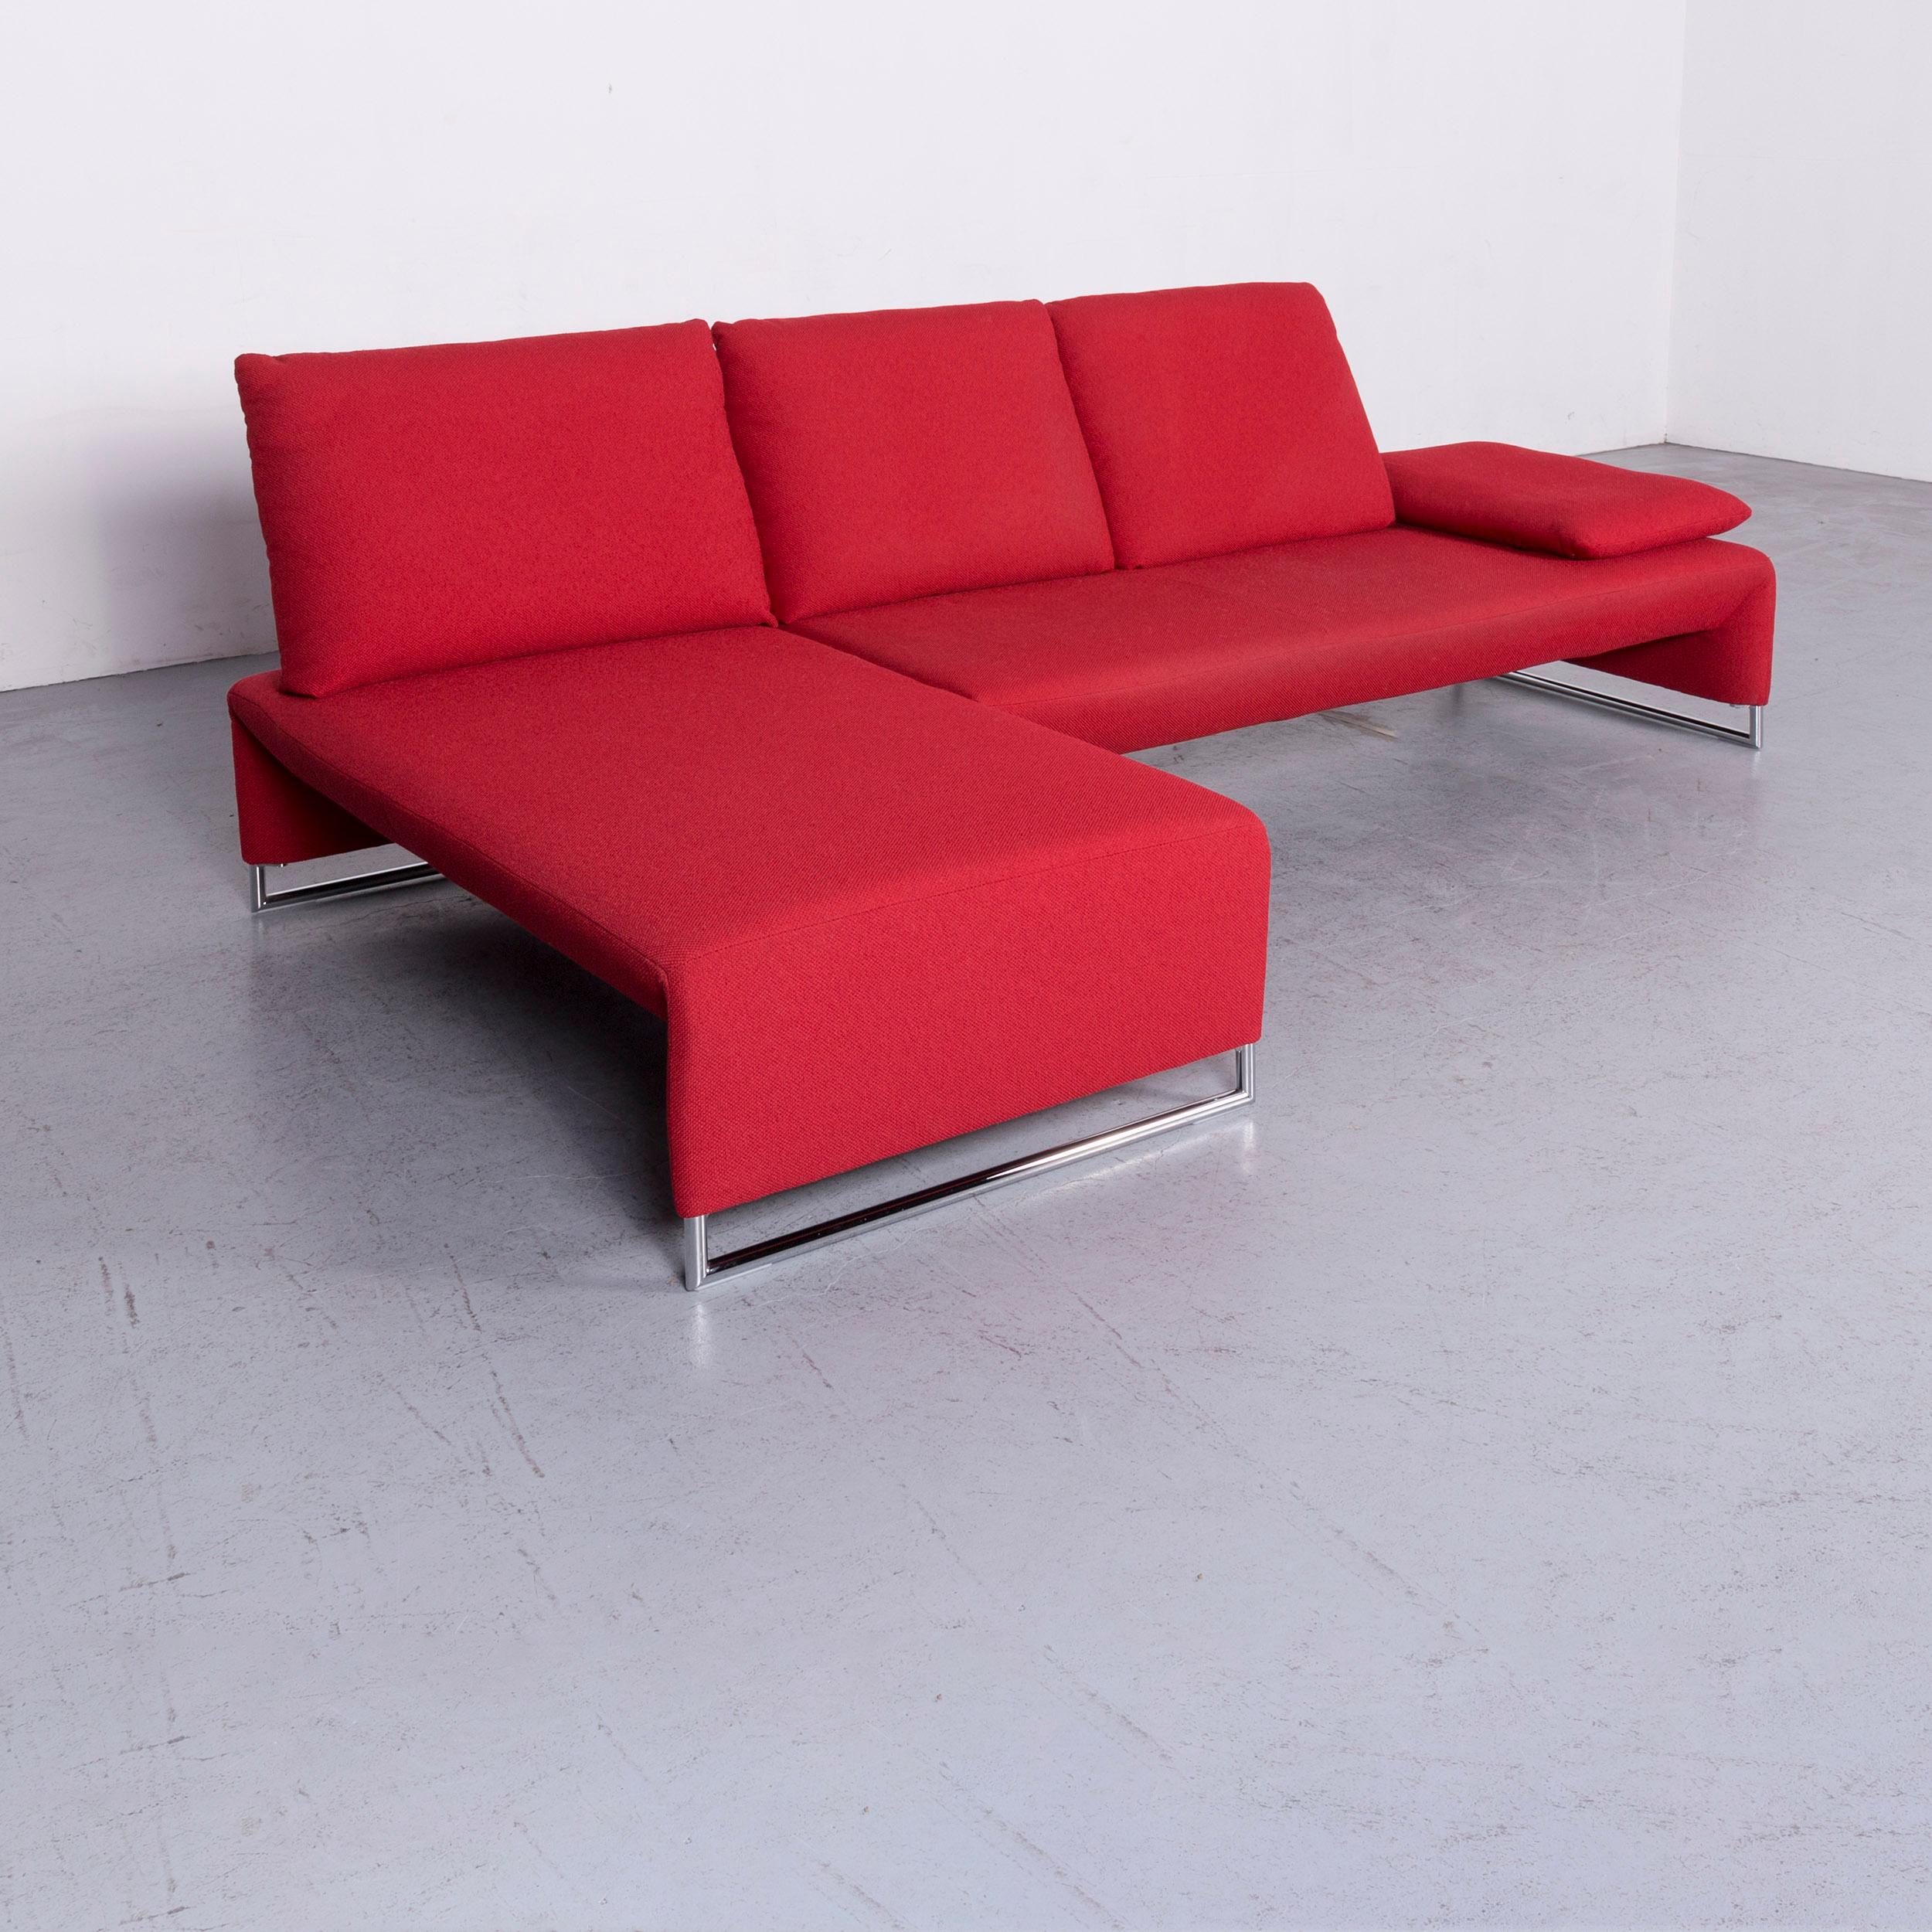 We bring to you a Koinor designer fabric sofa in red corner, sofa couch.